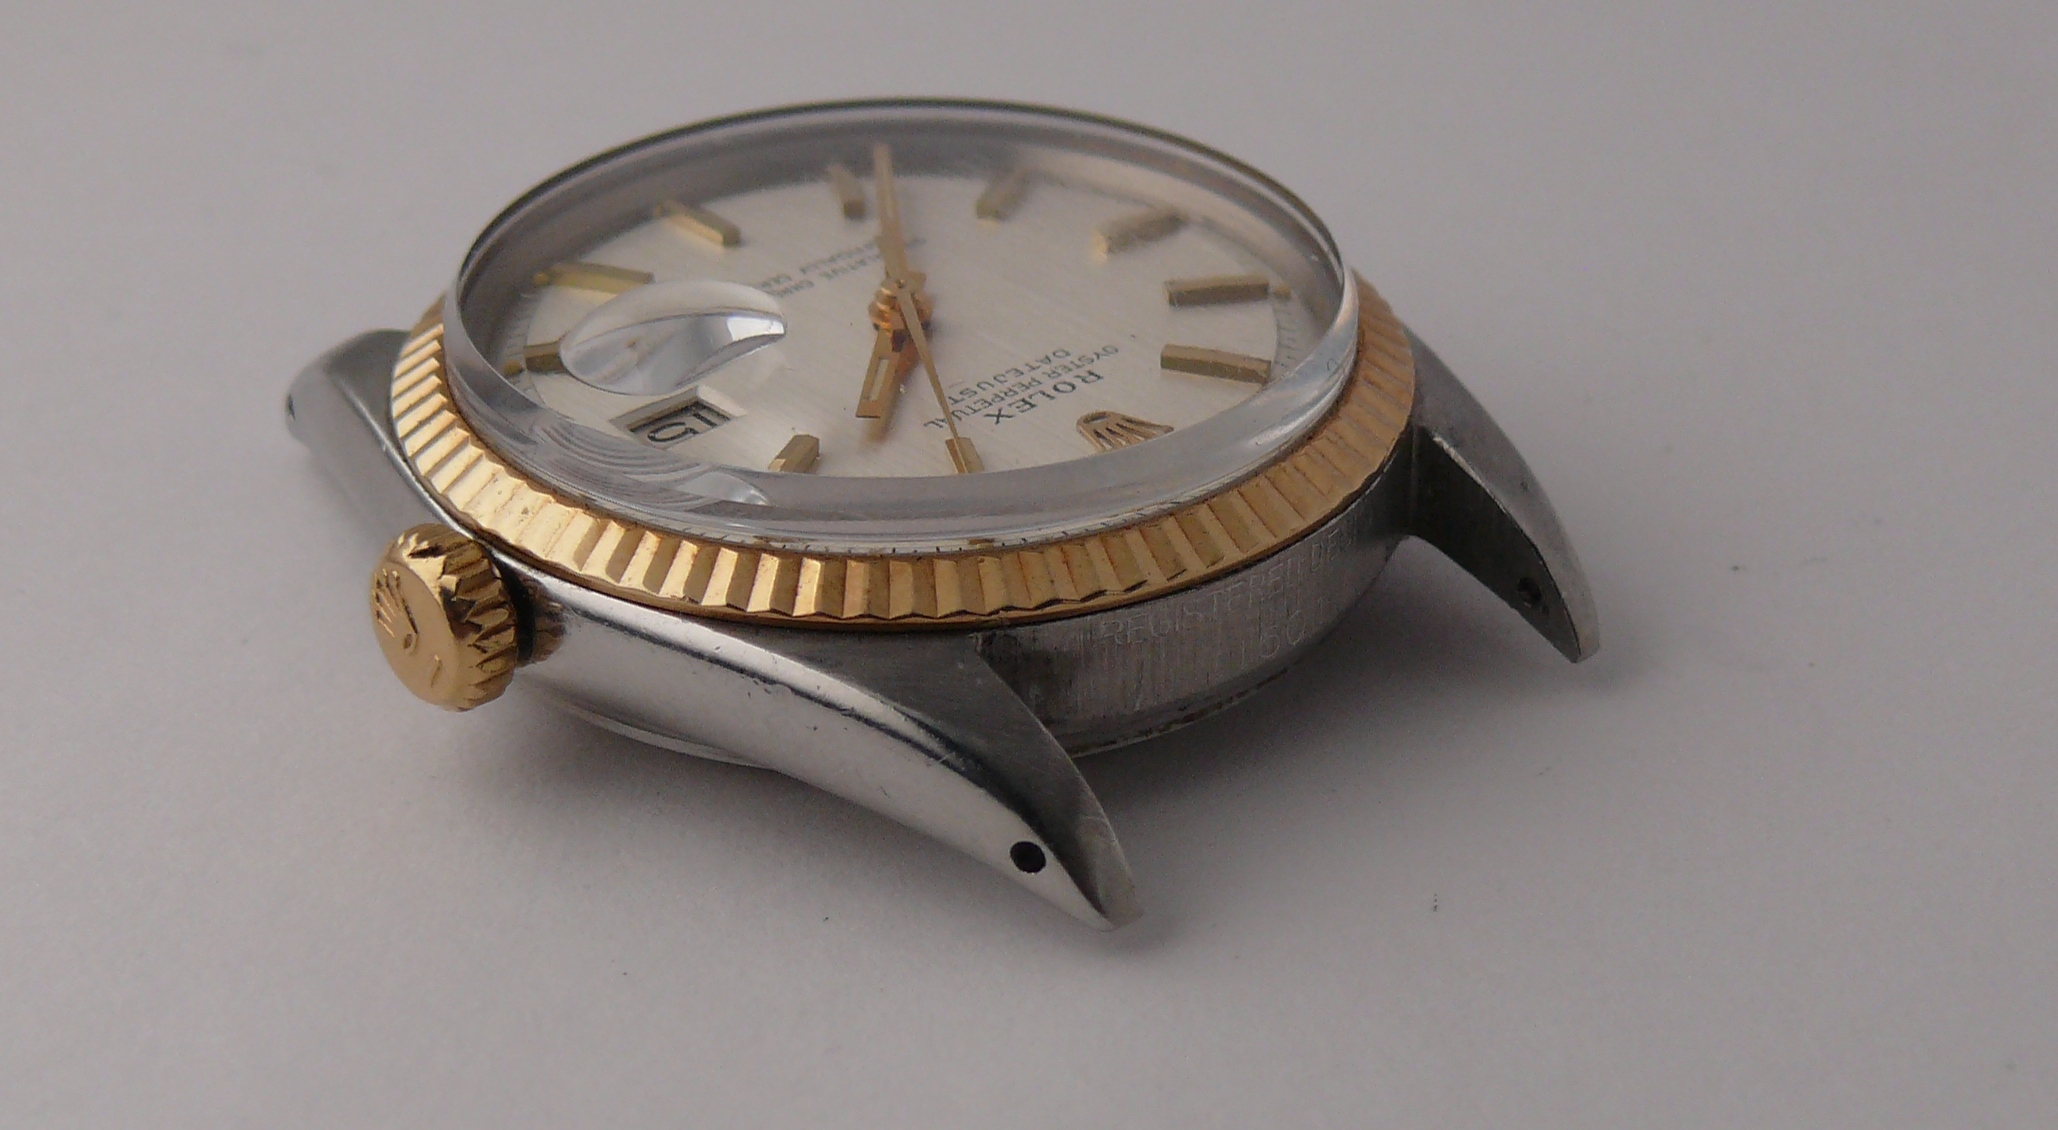 1966 Vintage Rolex Datejust 1601, all numbers are legible between lugs. Serial 1.3m dates this to - Image 10 of 16